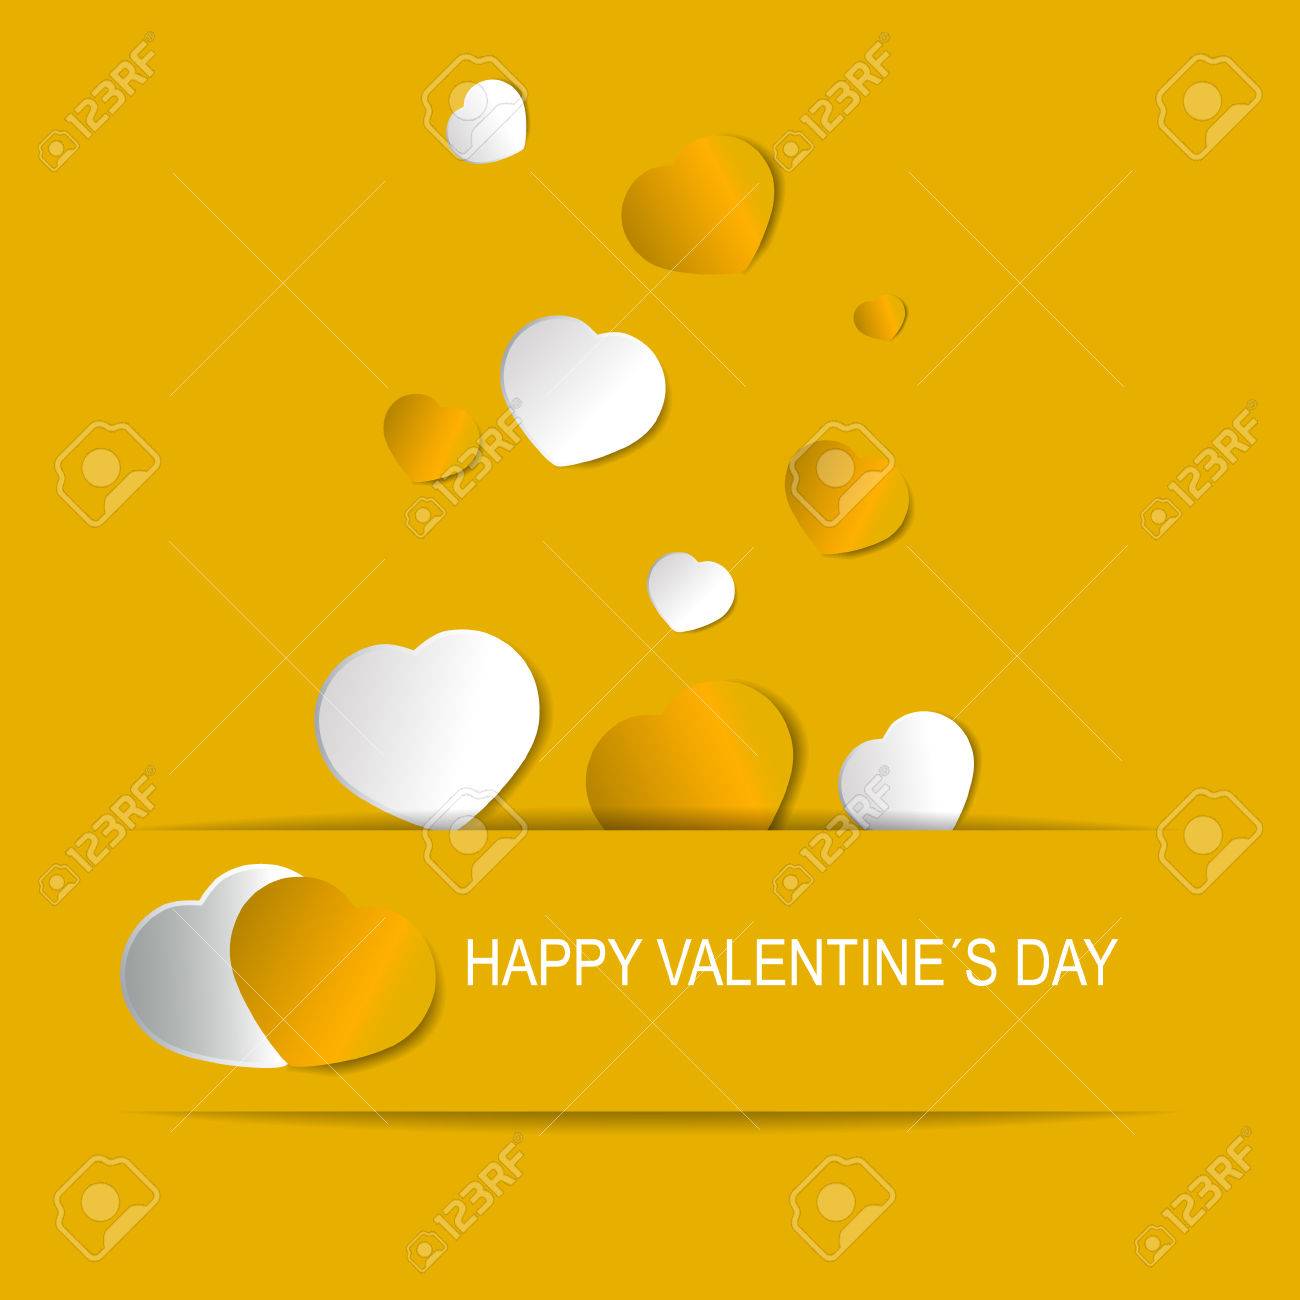 Valentines Day Wallpaper With Yellow And White Hearts Royalty